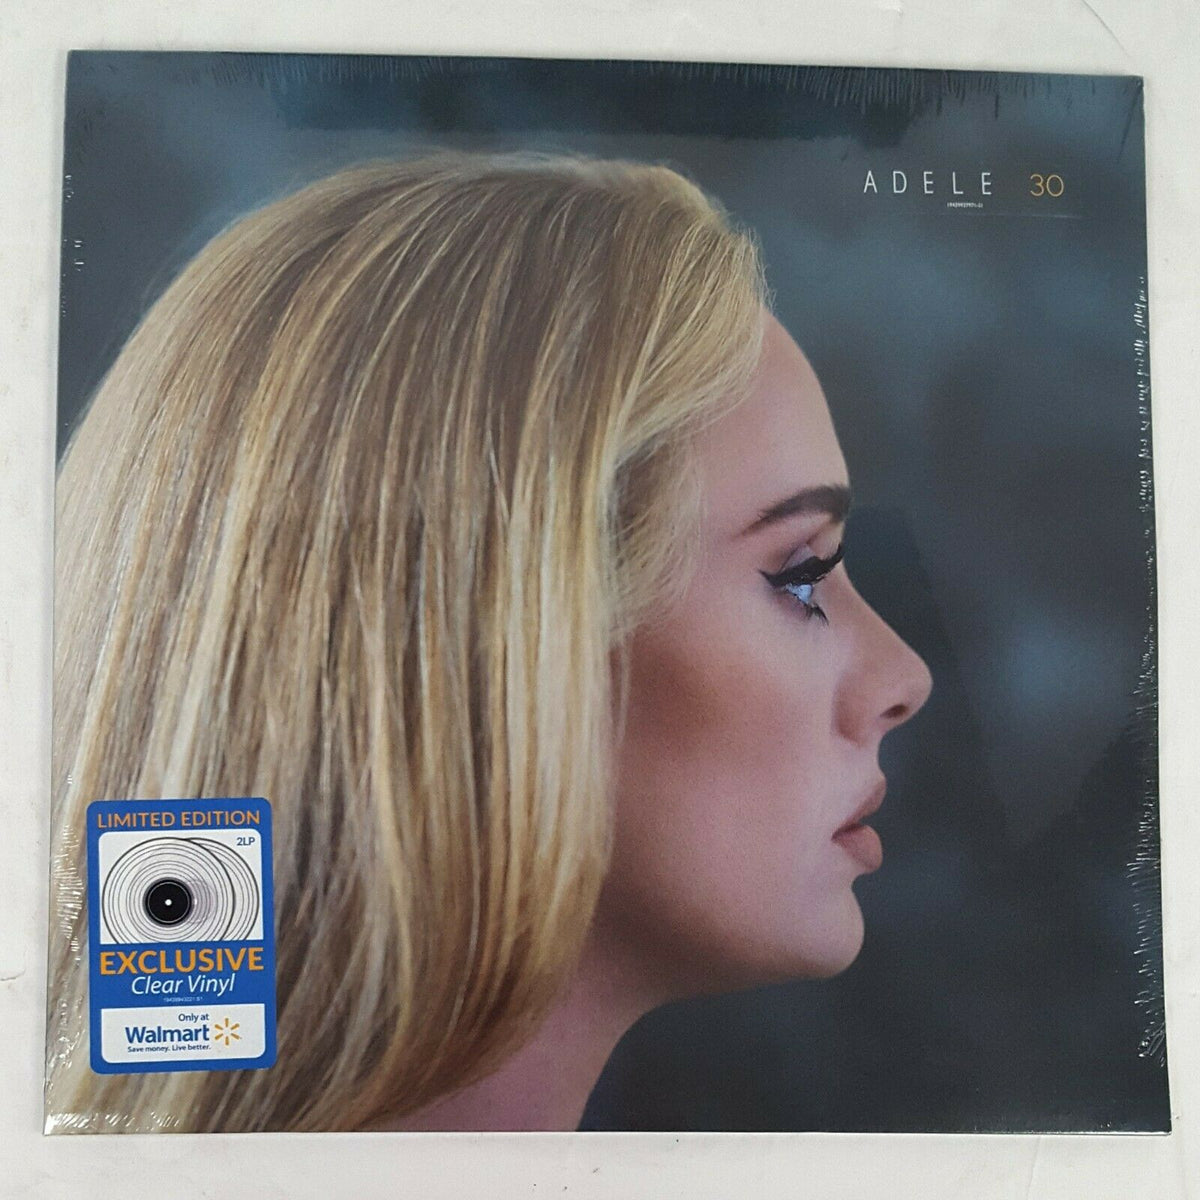 Adele – 30 – 2xLP Clear Vinyl (Walmart Exclusive with 12” x 12” Print) - SEALED